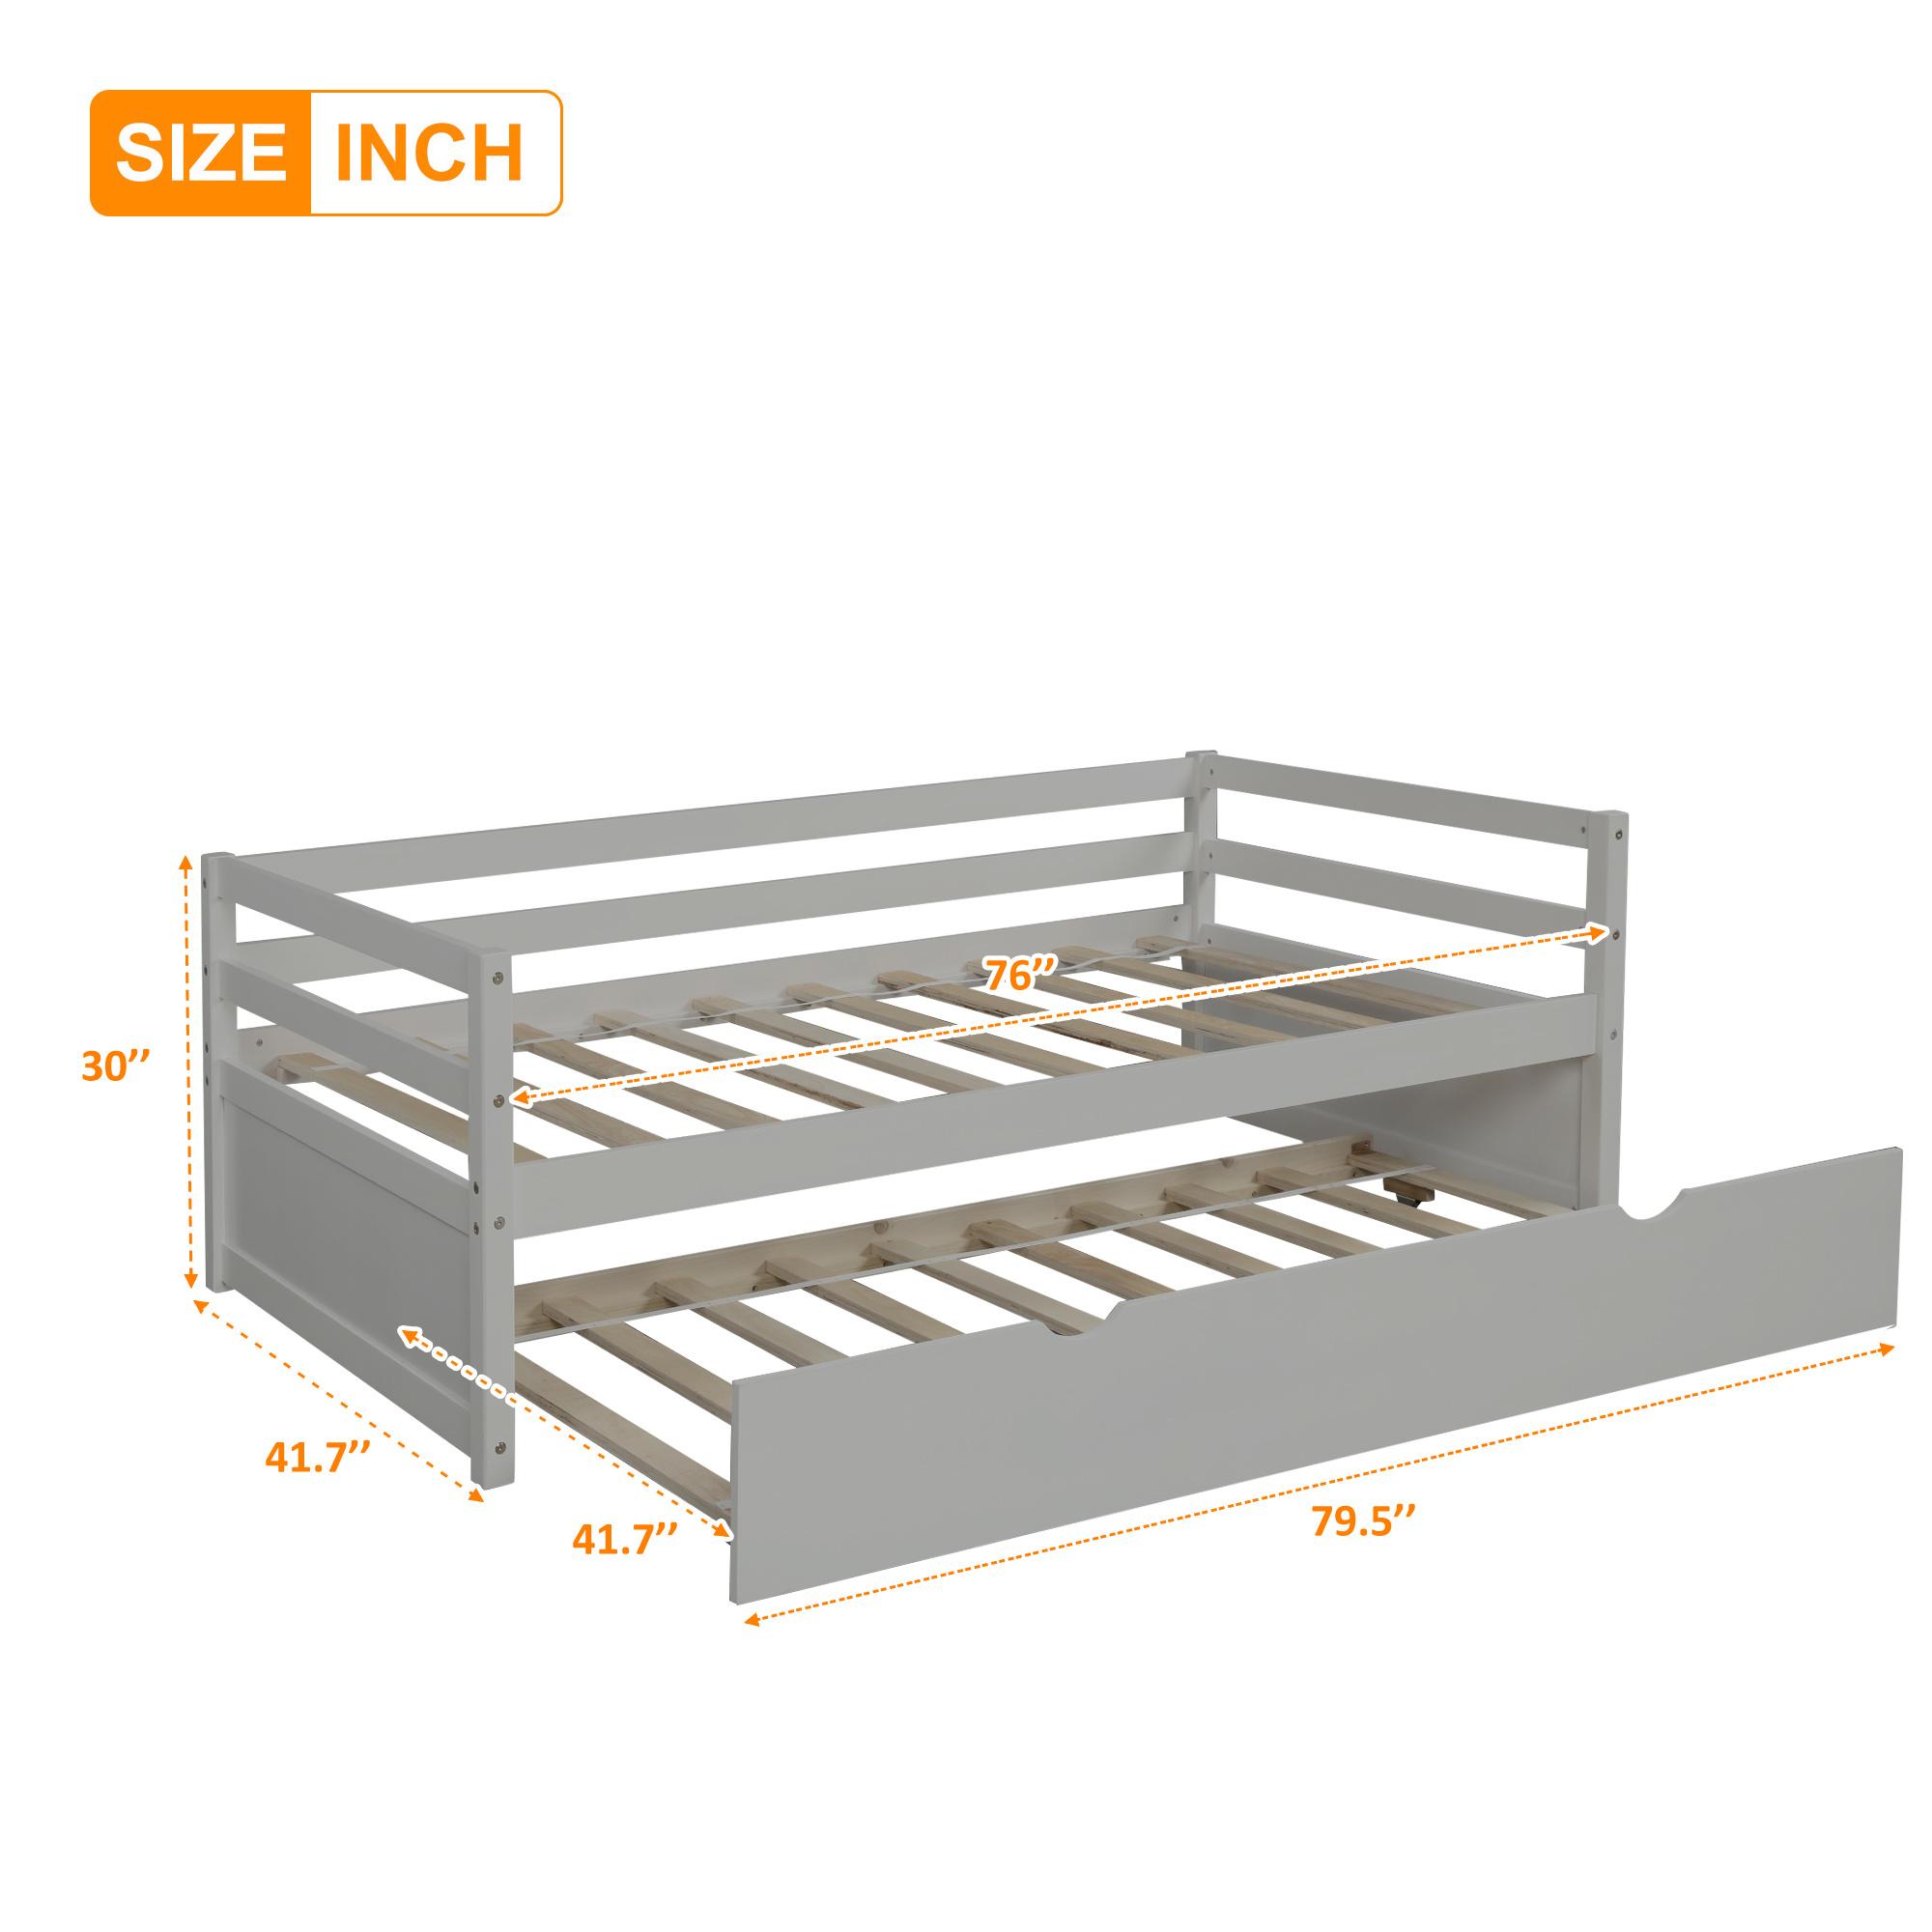 ARCTICSCORPION Twin Size Daybed with Pull Out Trundle,Wood Bed Frame with Backboard, Pull-out Combination Bed with Casters with Wooden Slat Support for Kids Room, No Box Spring Needed, Gray Finish - image 5 of 7